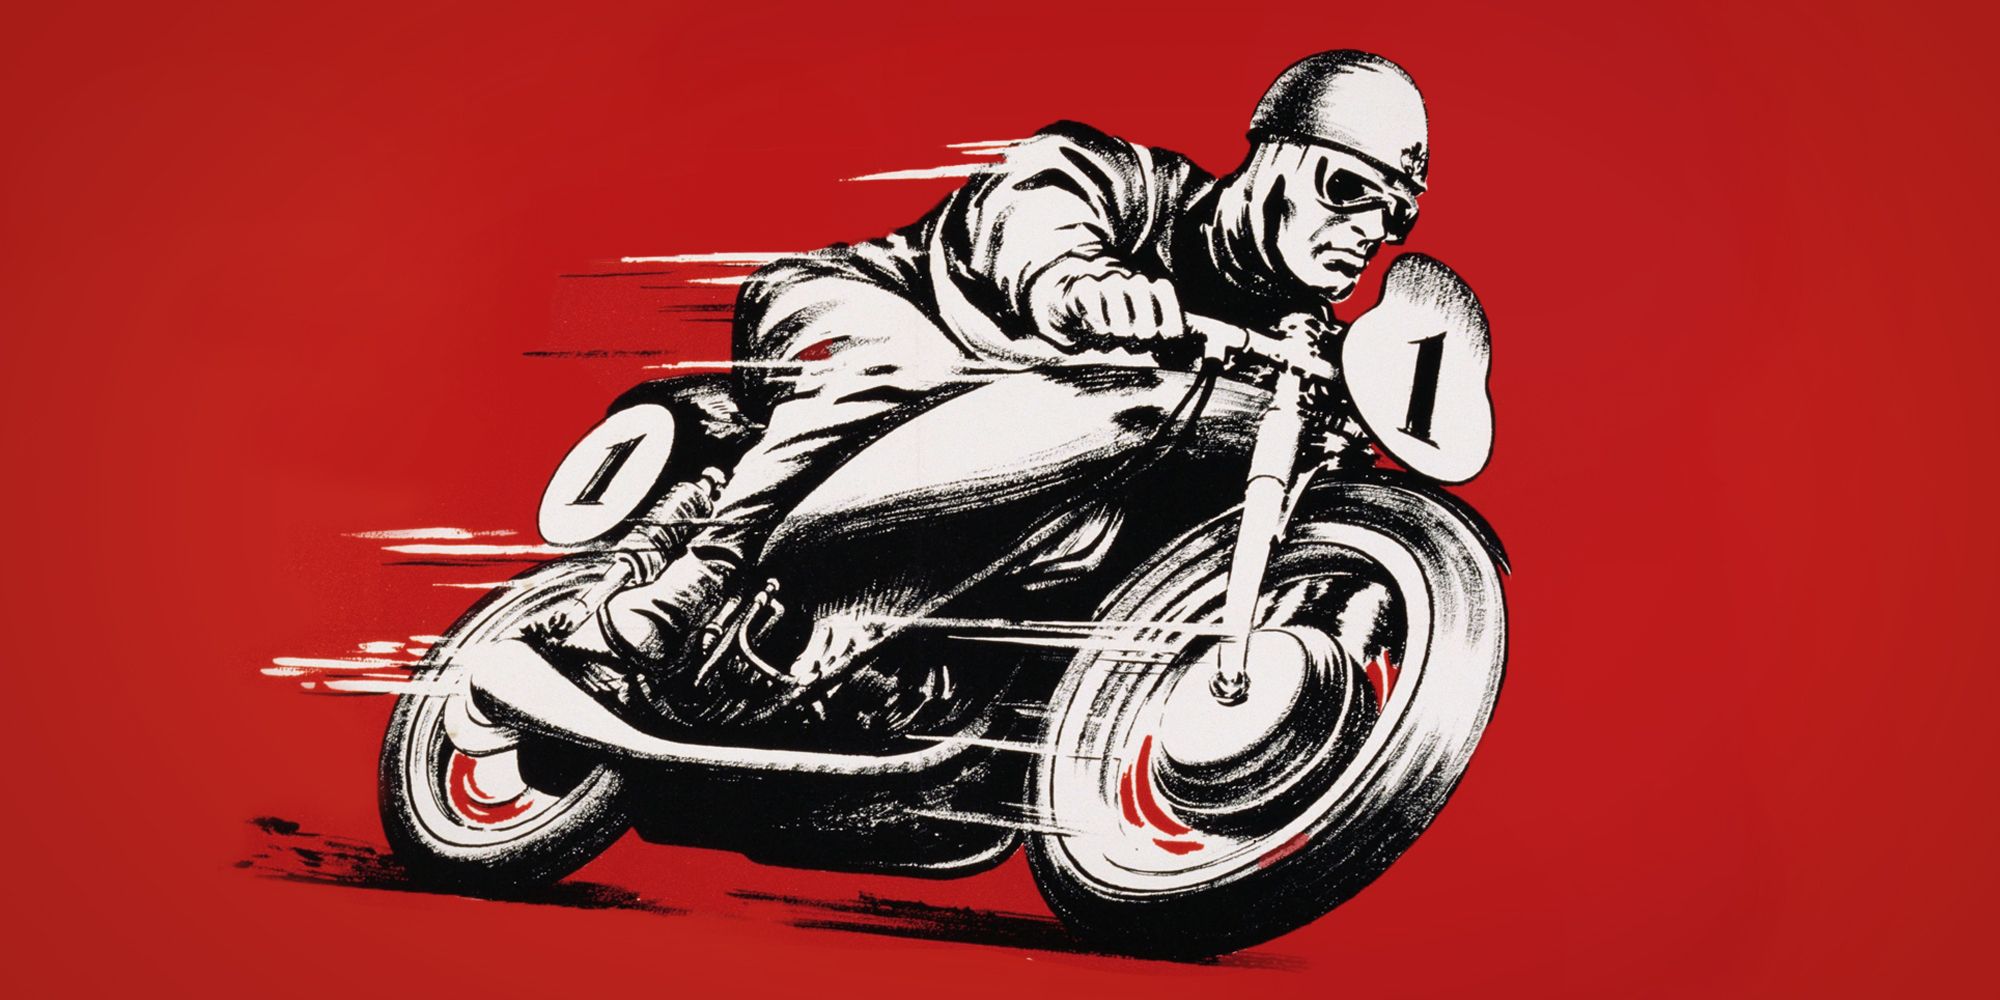 classic racing motorcycles for sale